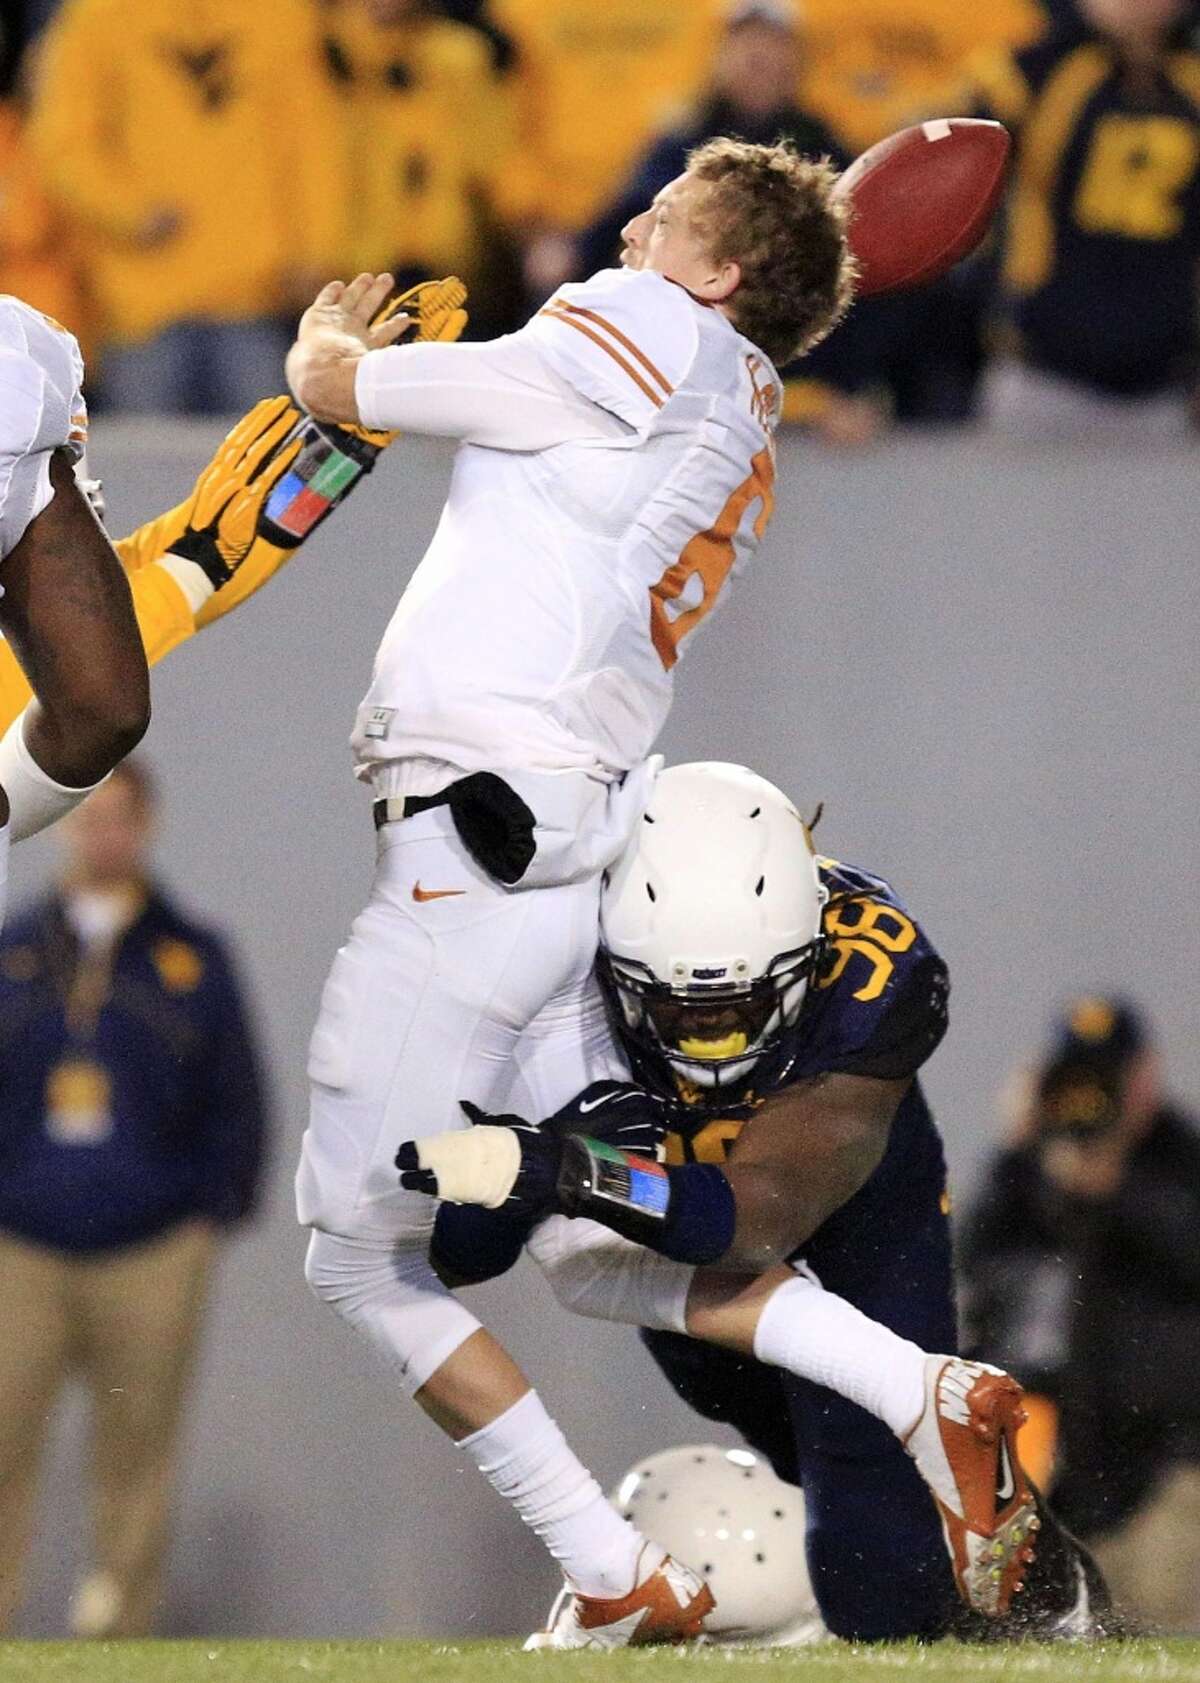 Texas quarterback Case McCoy (6) is sacked by West Virginia's Will Clarke (98) during the second quarter of an NCAA college football game in Morgantown, W.Va., on Saturday, Nov. 9, 2013. (AP Photo/Christopher Jackson)